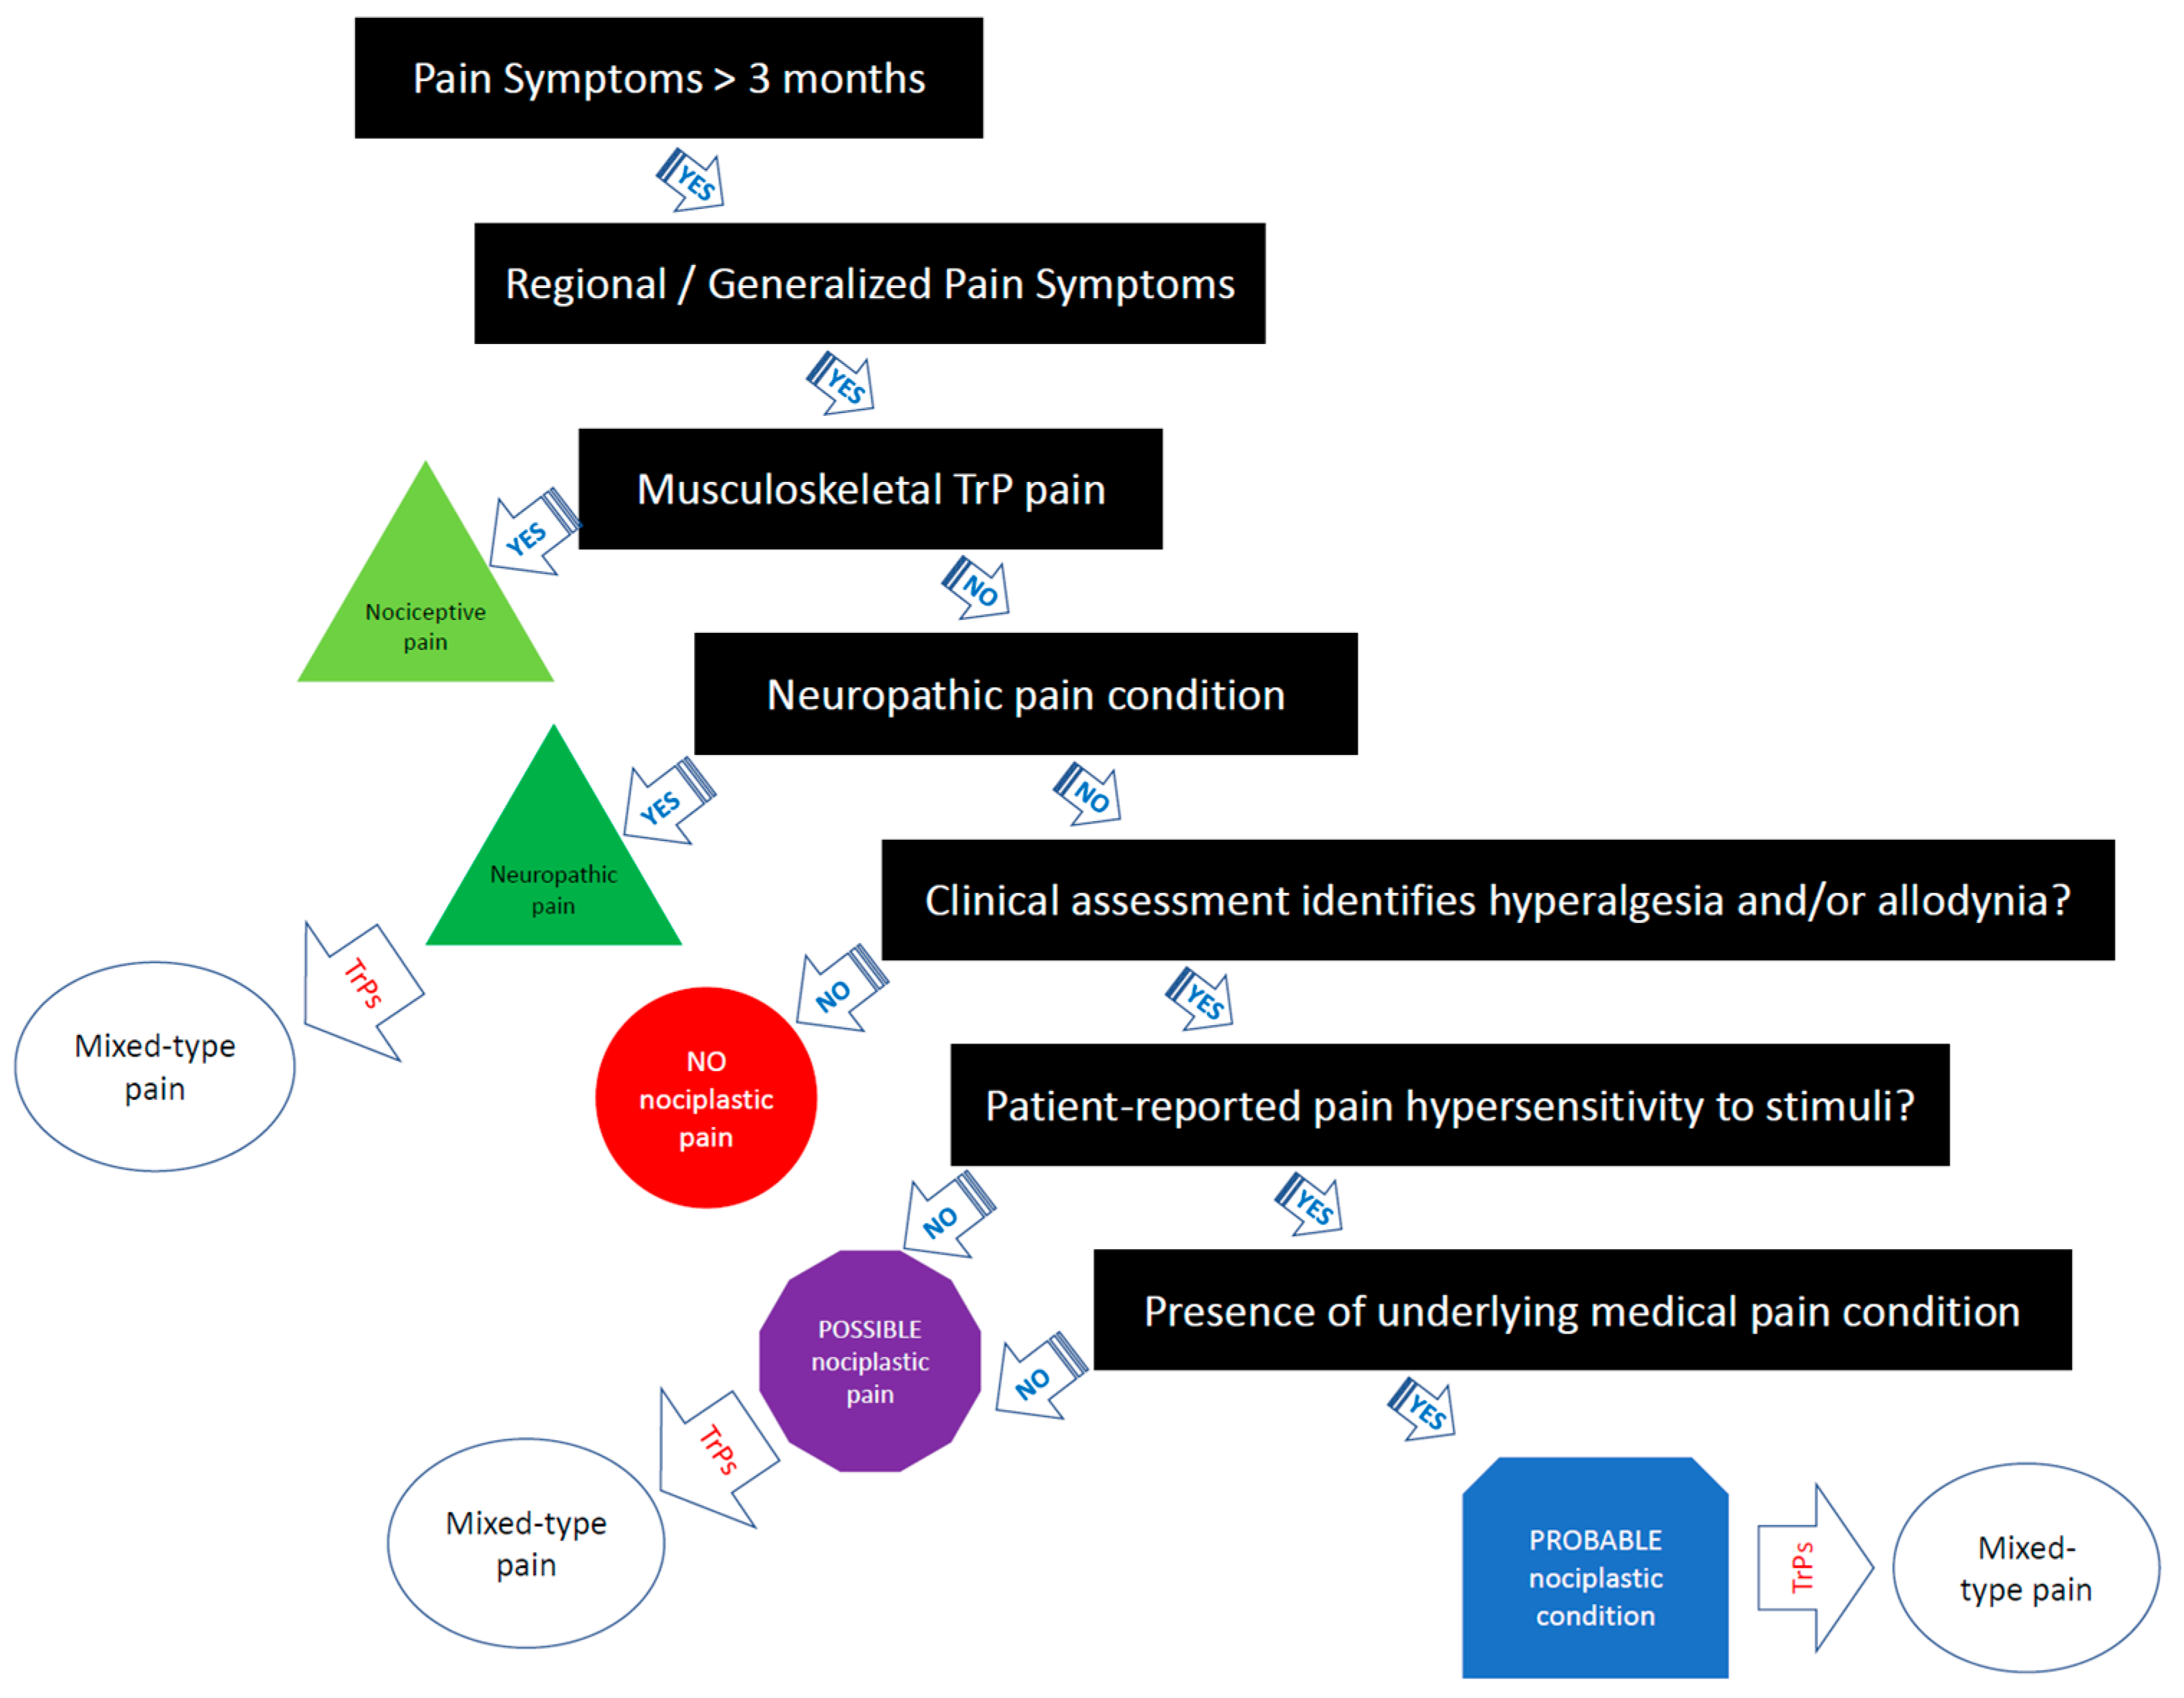 ILIOTIBIAL BAND SYNDROME: THE PATHOPHYSIOLOGY, CLINICAL ASSESSMENT,  DIAGNOSIS, AND TREATMENT STRATEGY